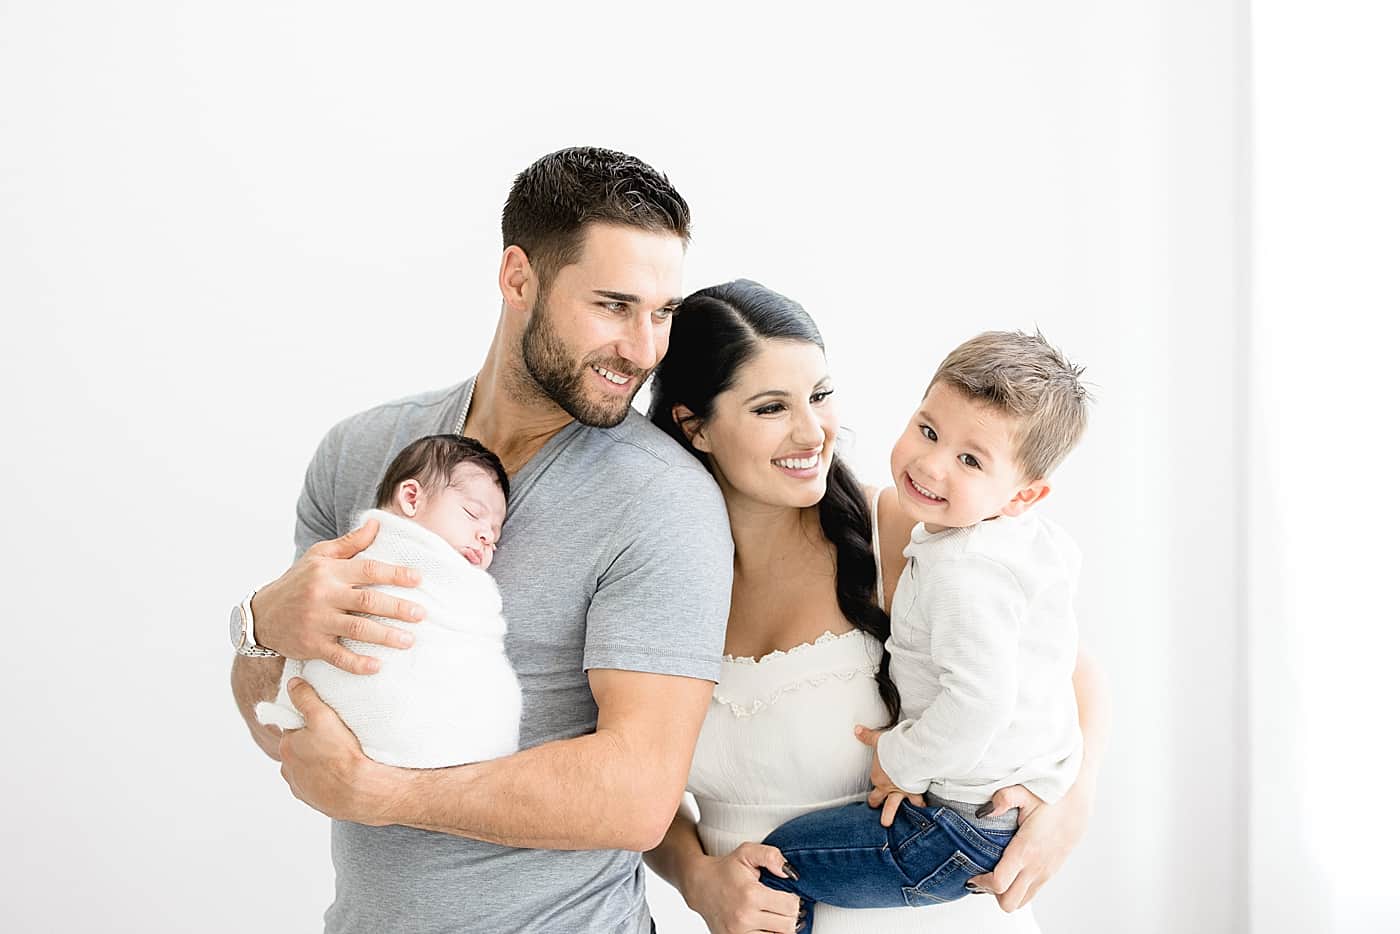 Image of Kevin Kiermaier with his wife, Marisa Moralobo, and their kids